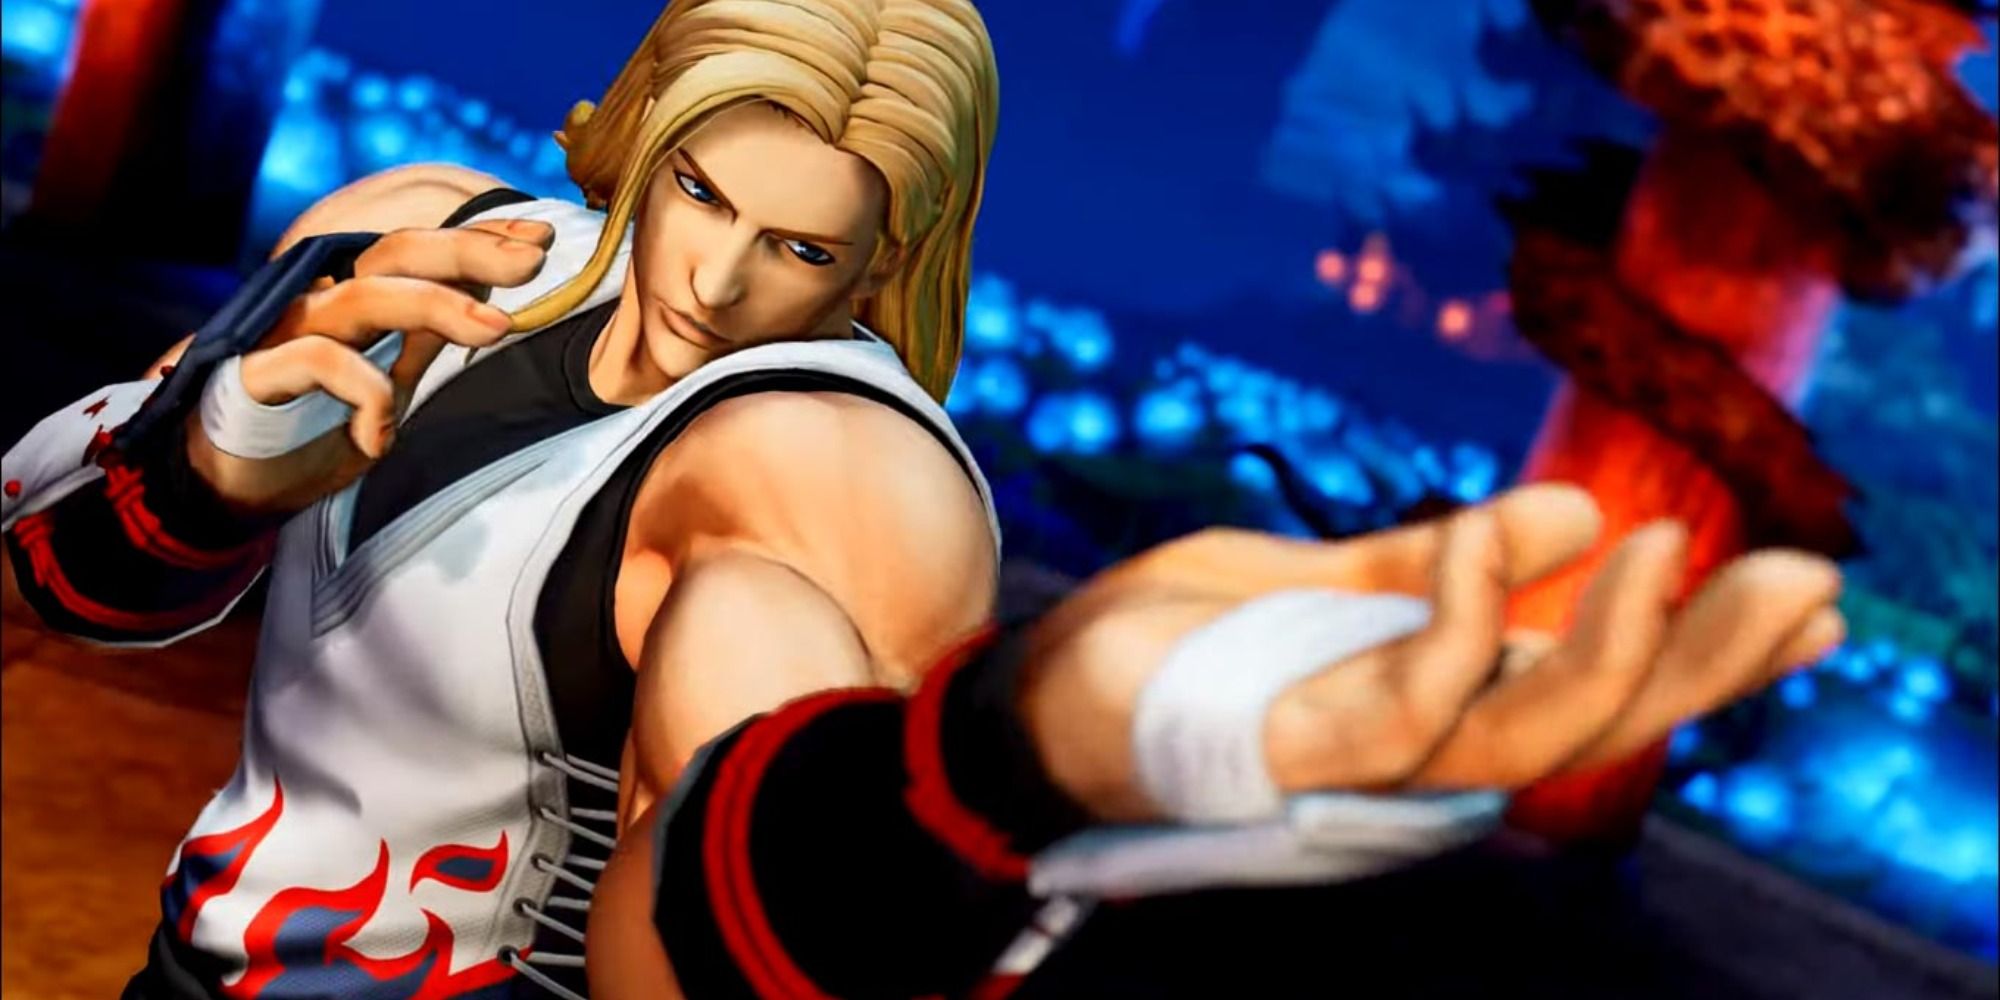 The King Of Fighters 15 Team Fatal Fury Move List And Strategy Guide